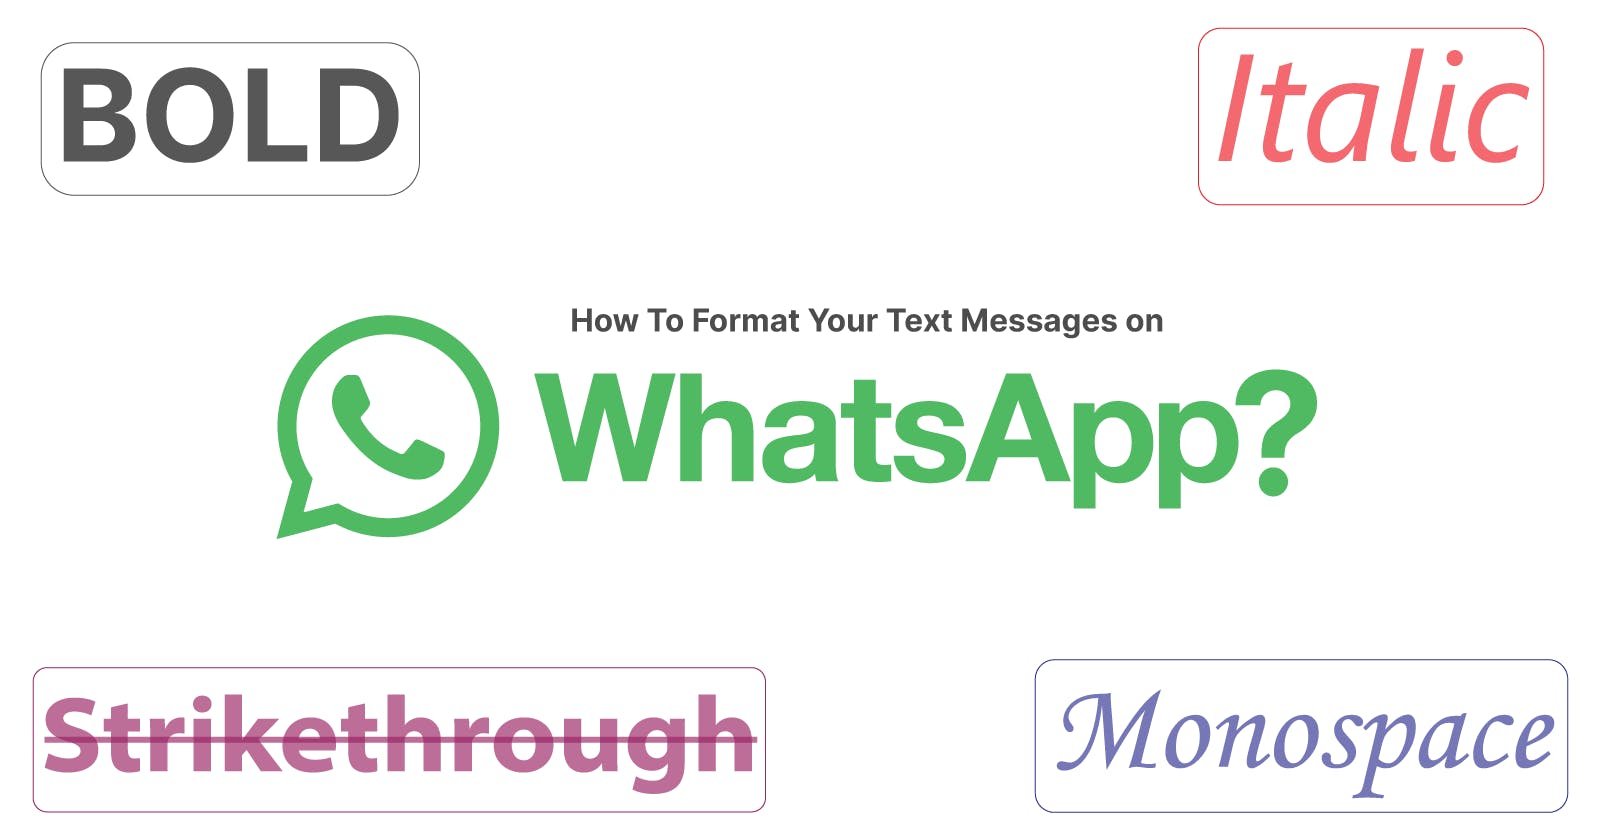 How To Format Your Text Messages On WhatsApp?